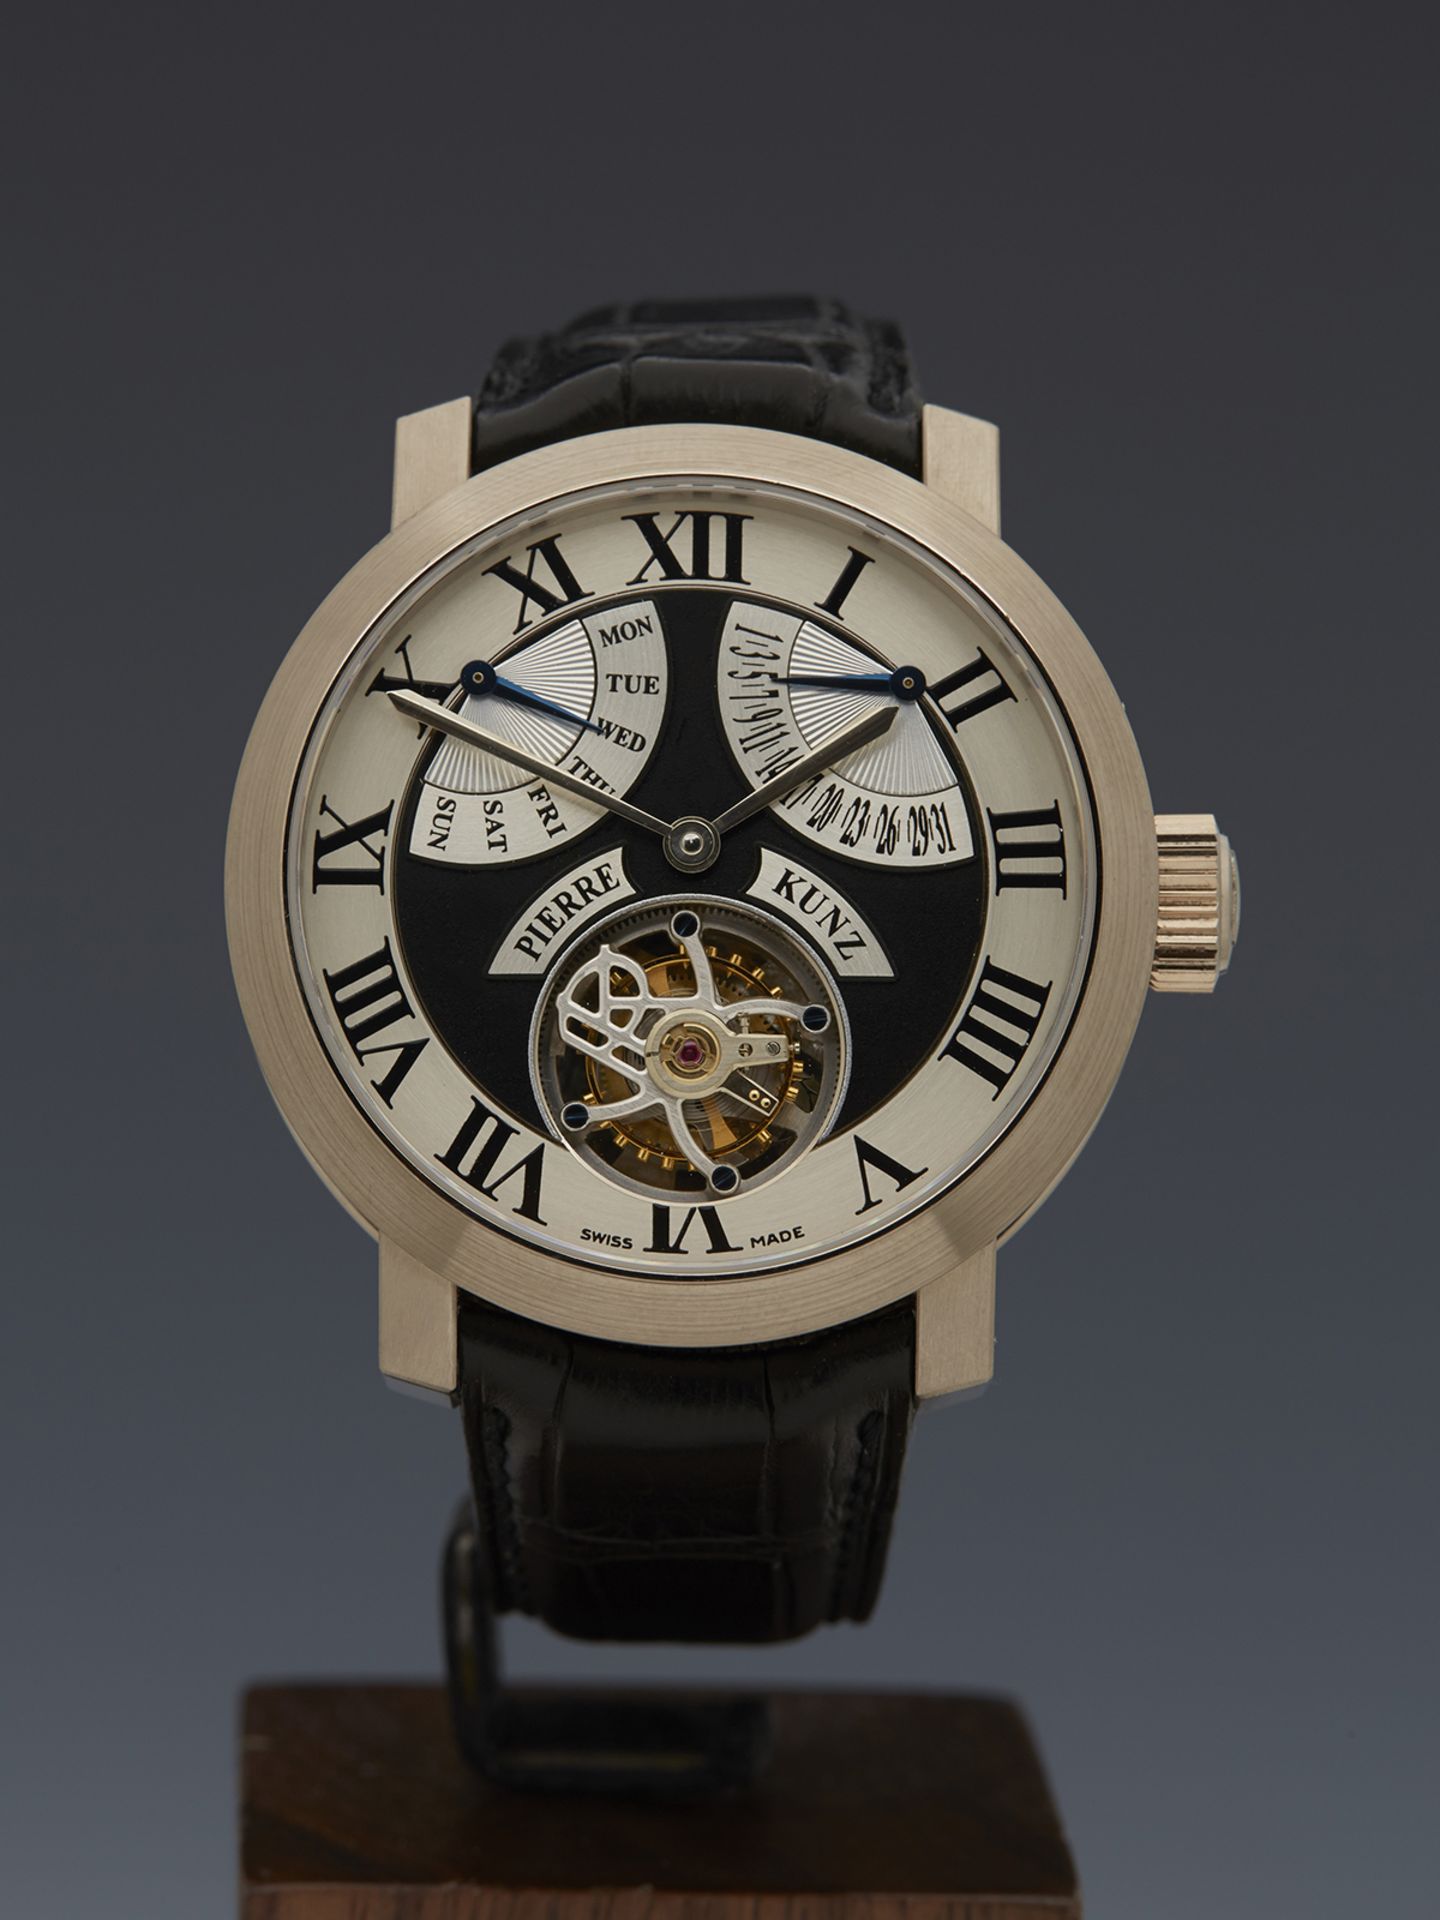 Pierre Kunz, Tourbillon Limited Edition Day Date 41mm 18k White Gold - Image 5 of 11